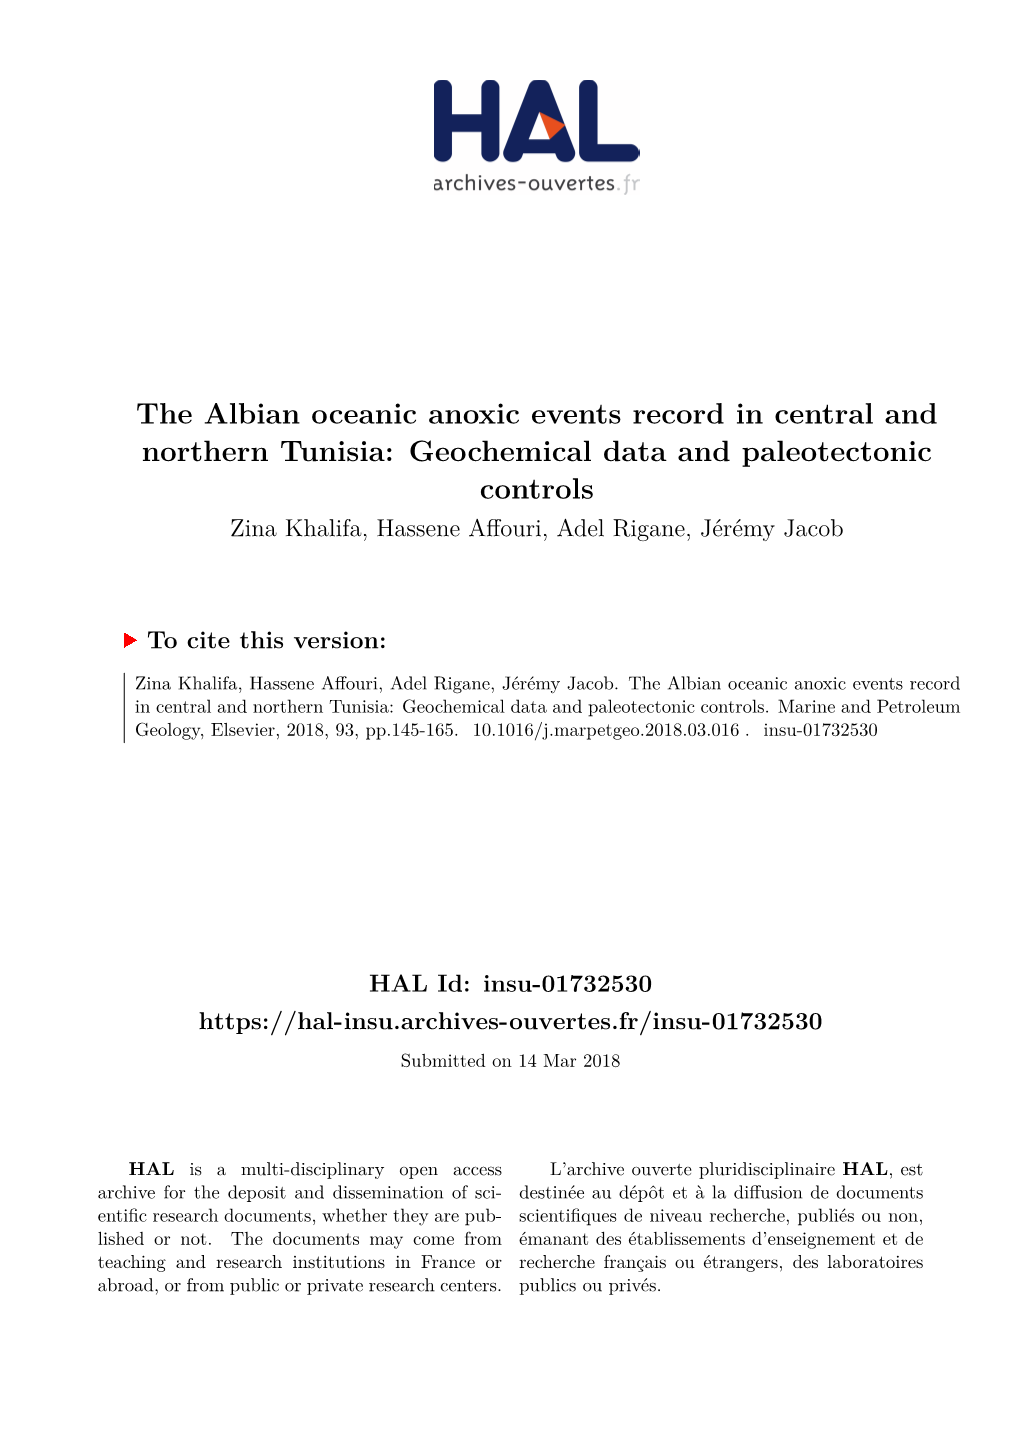 The Albian Oceanic Anoxic Events Record in Central and Northern Tunisia